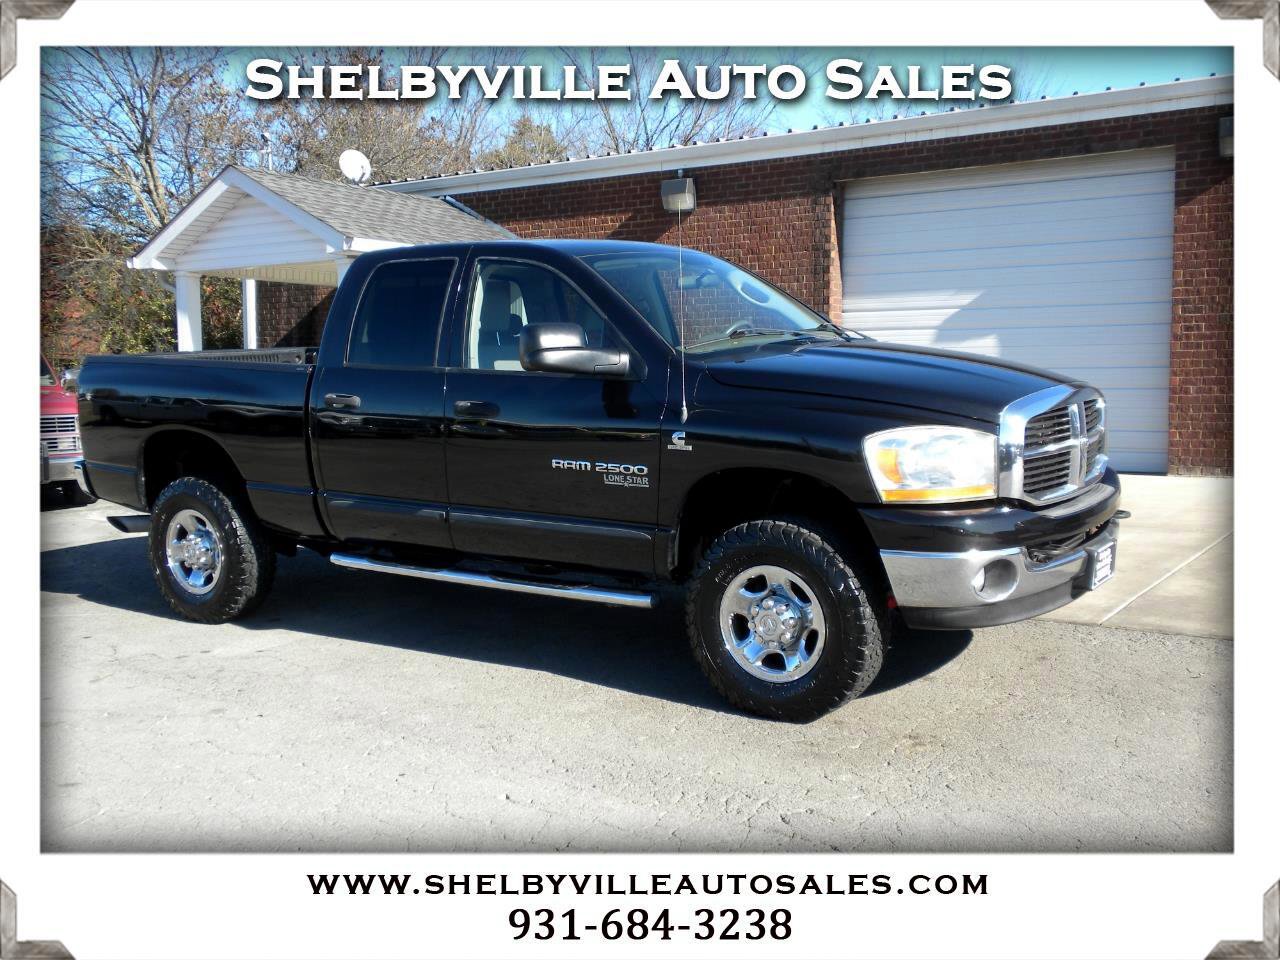 Cheap Cars for sale in Shelbyville Tennessee | Affordable Shelbyville Cars